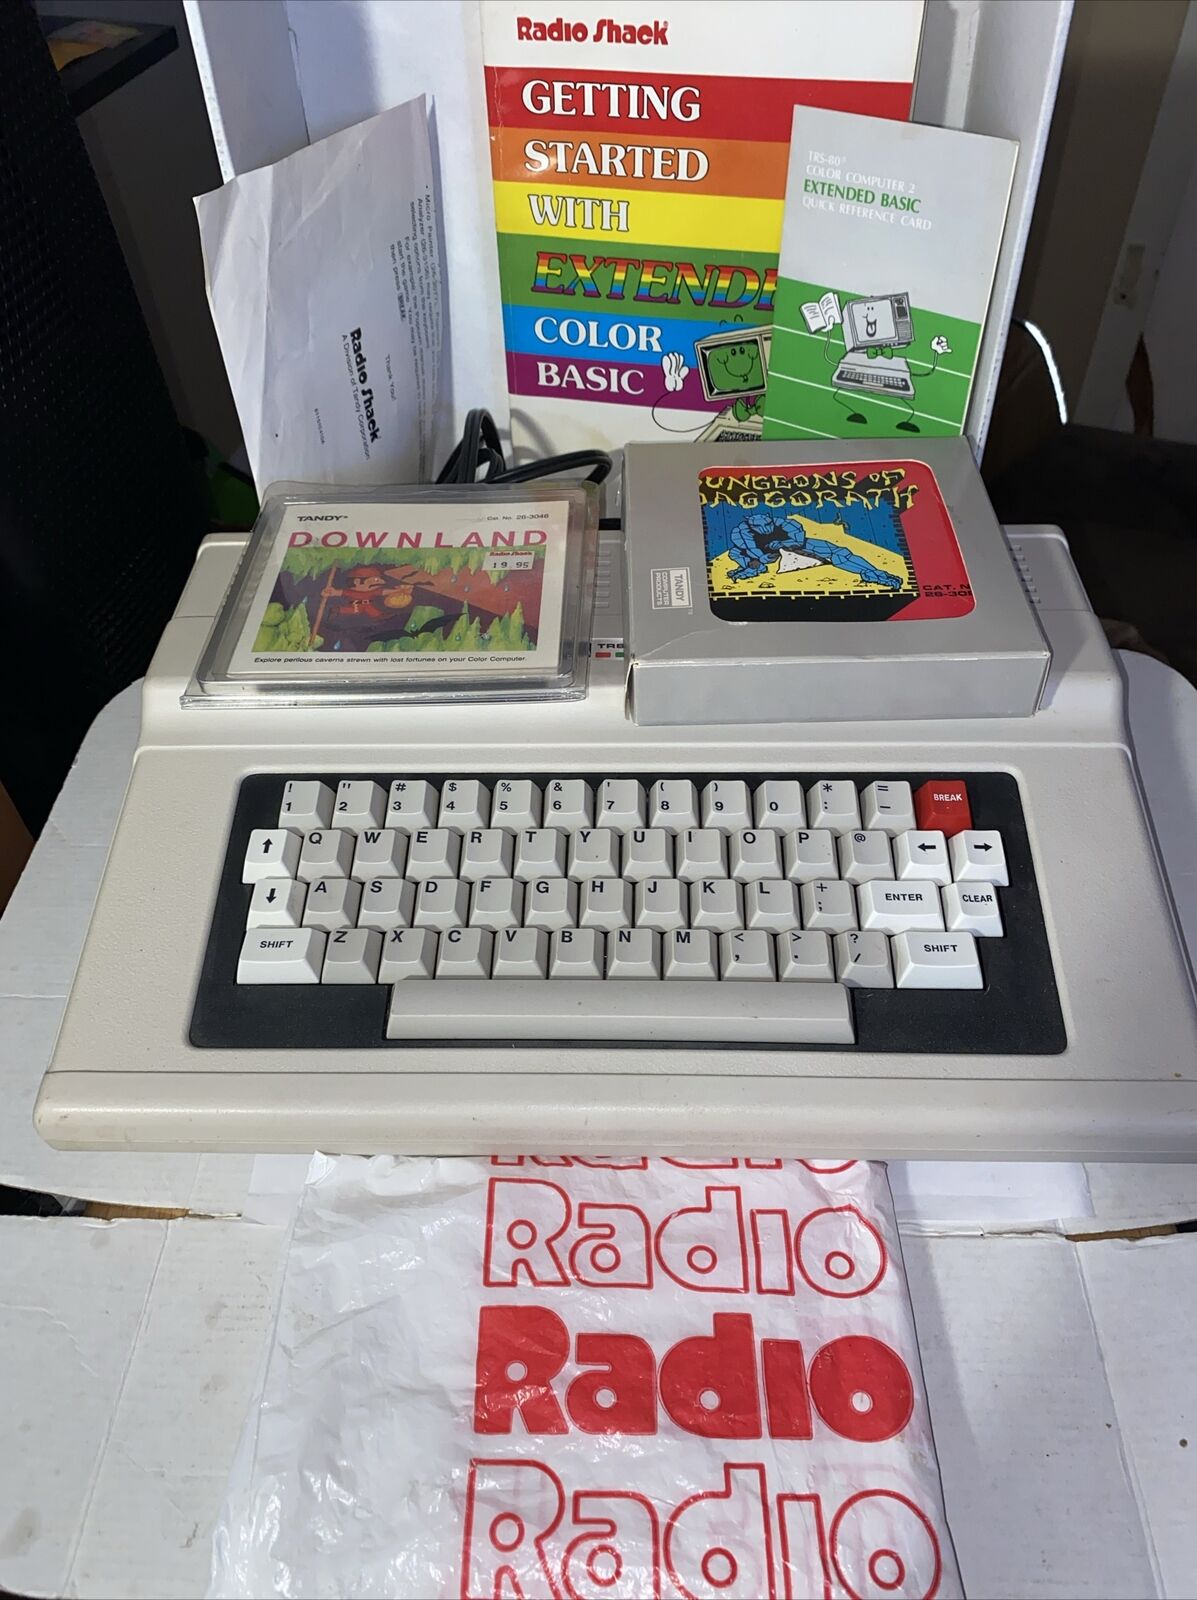 Radio Shack Tandy TRS 80 Color Computer 2 Dungeons of Daggorath, Downland Tested